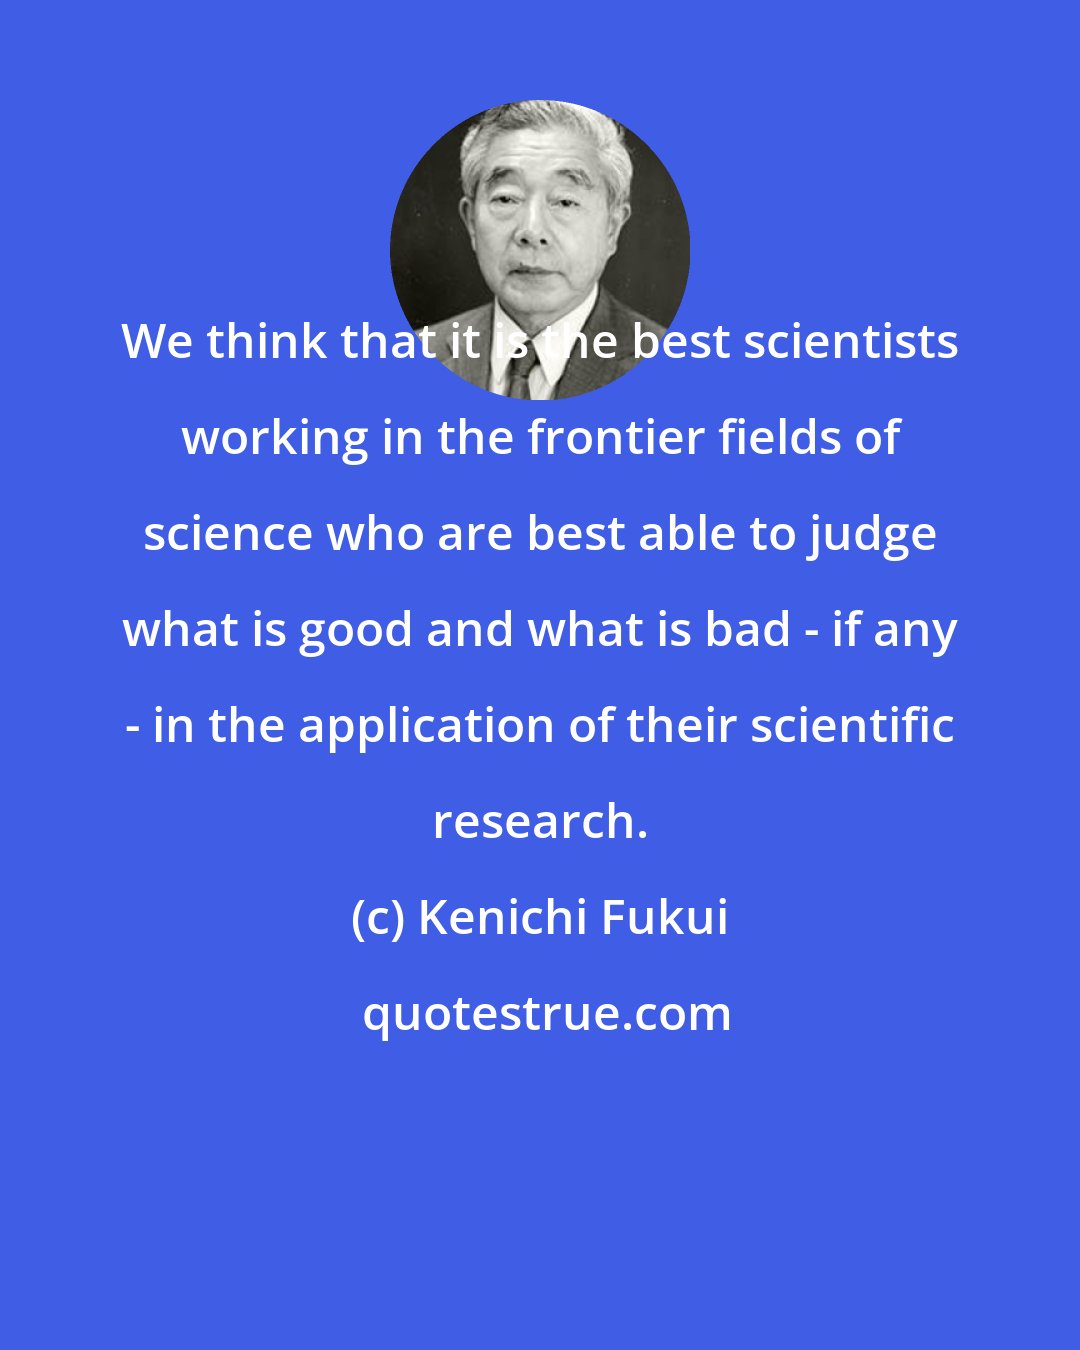 Kenichi Fukui: We think that it is the best scientists working in the frontier fields of science who are best able to judge what is good and what is bad - if any - in the application of their scientific research.